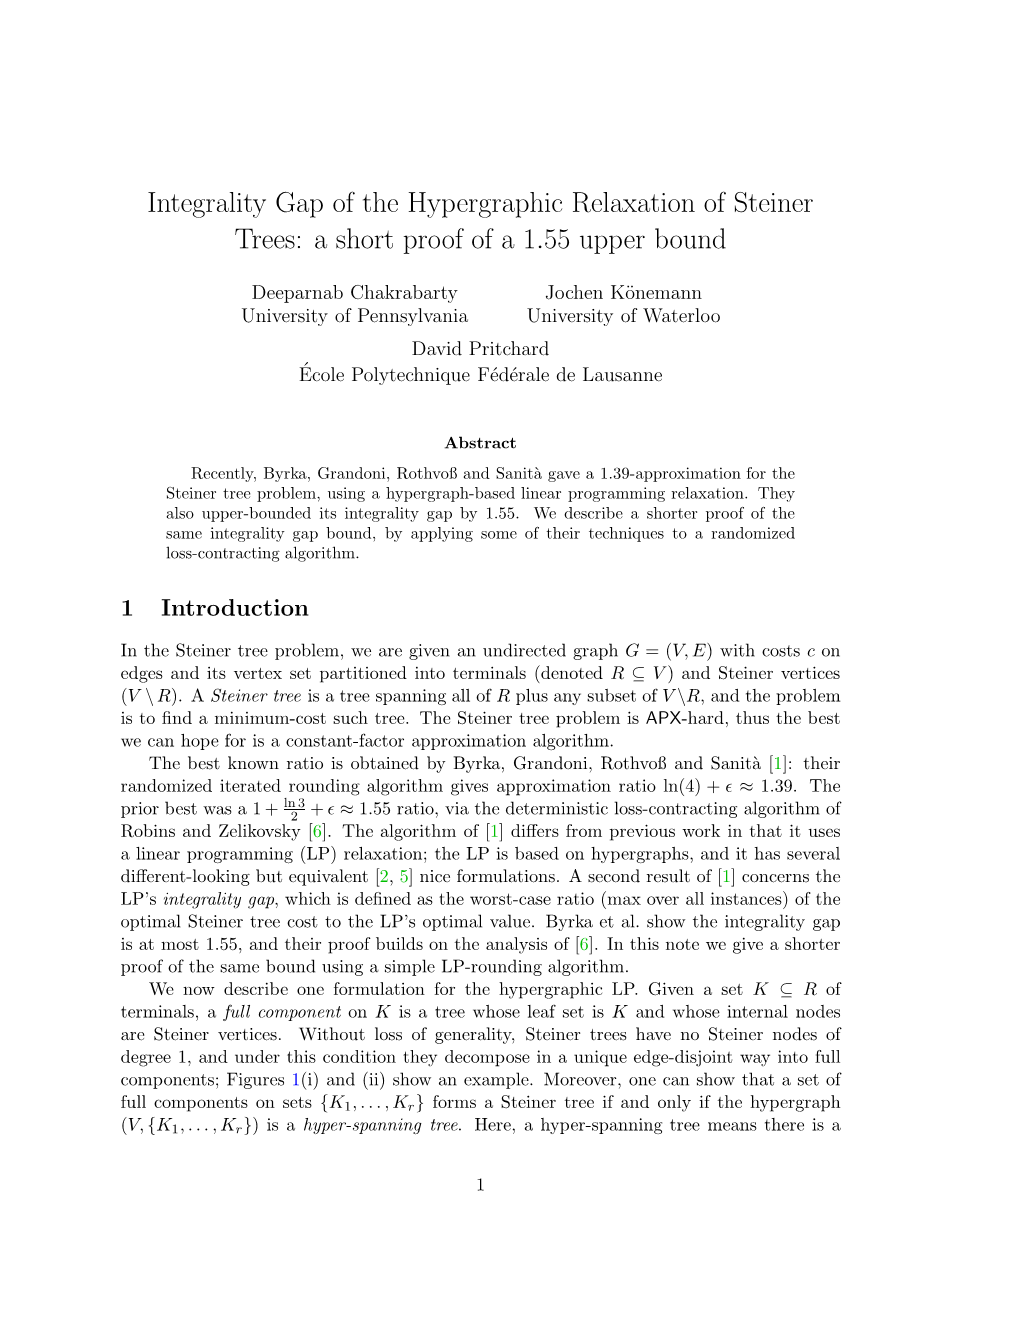 Integrality Gap of the Hypergraphic Relaxation of Steiner Trees: a Short Proof of a 1.55 Upper Bound